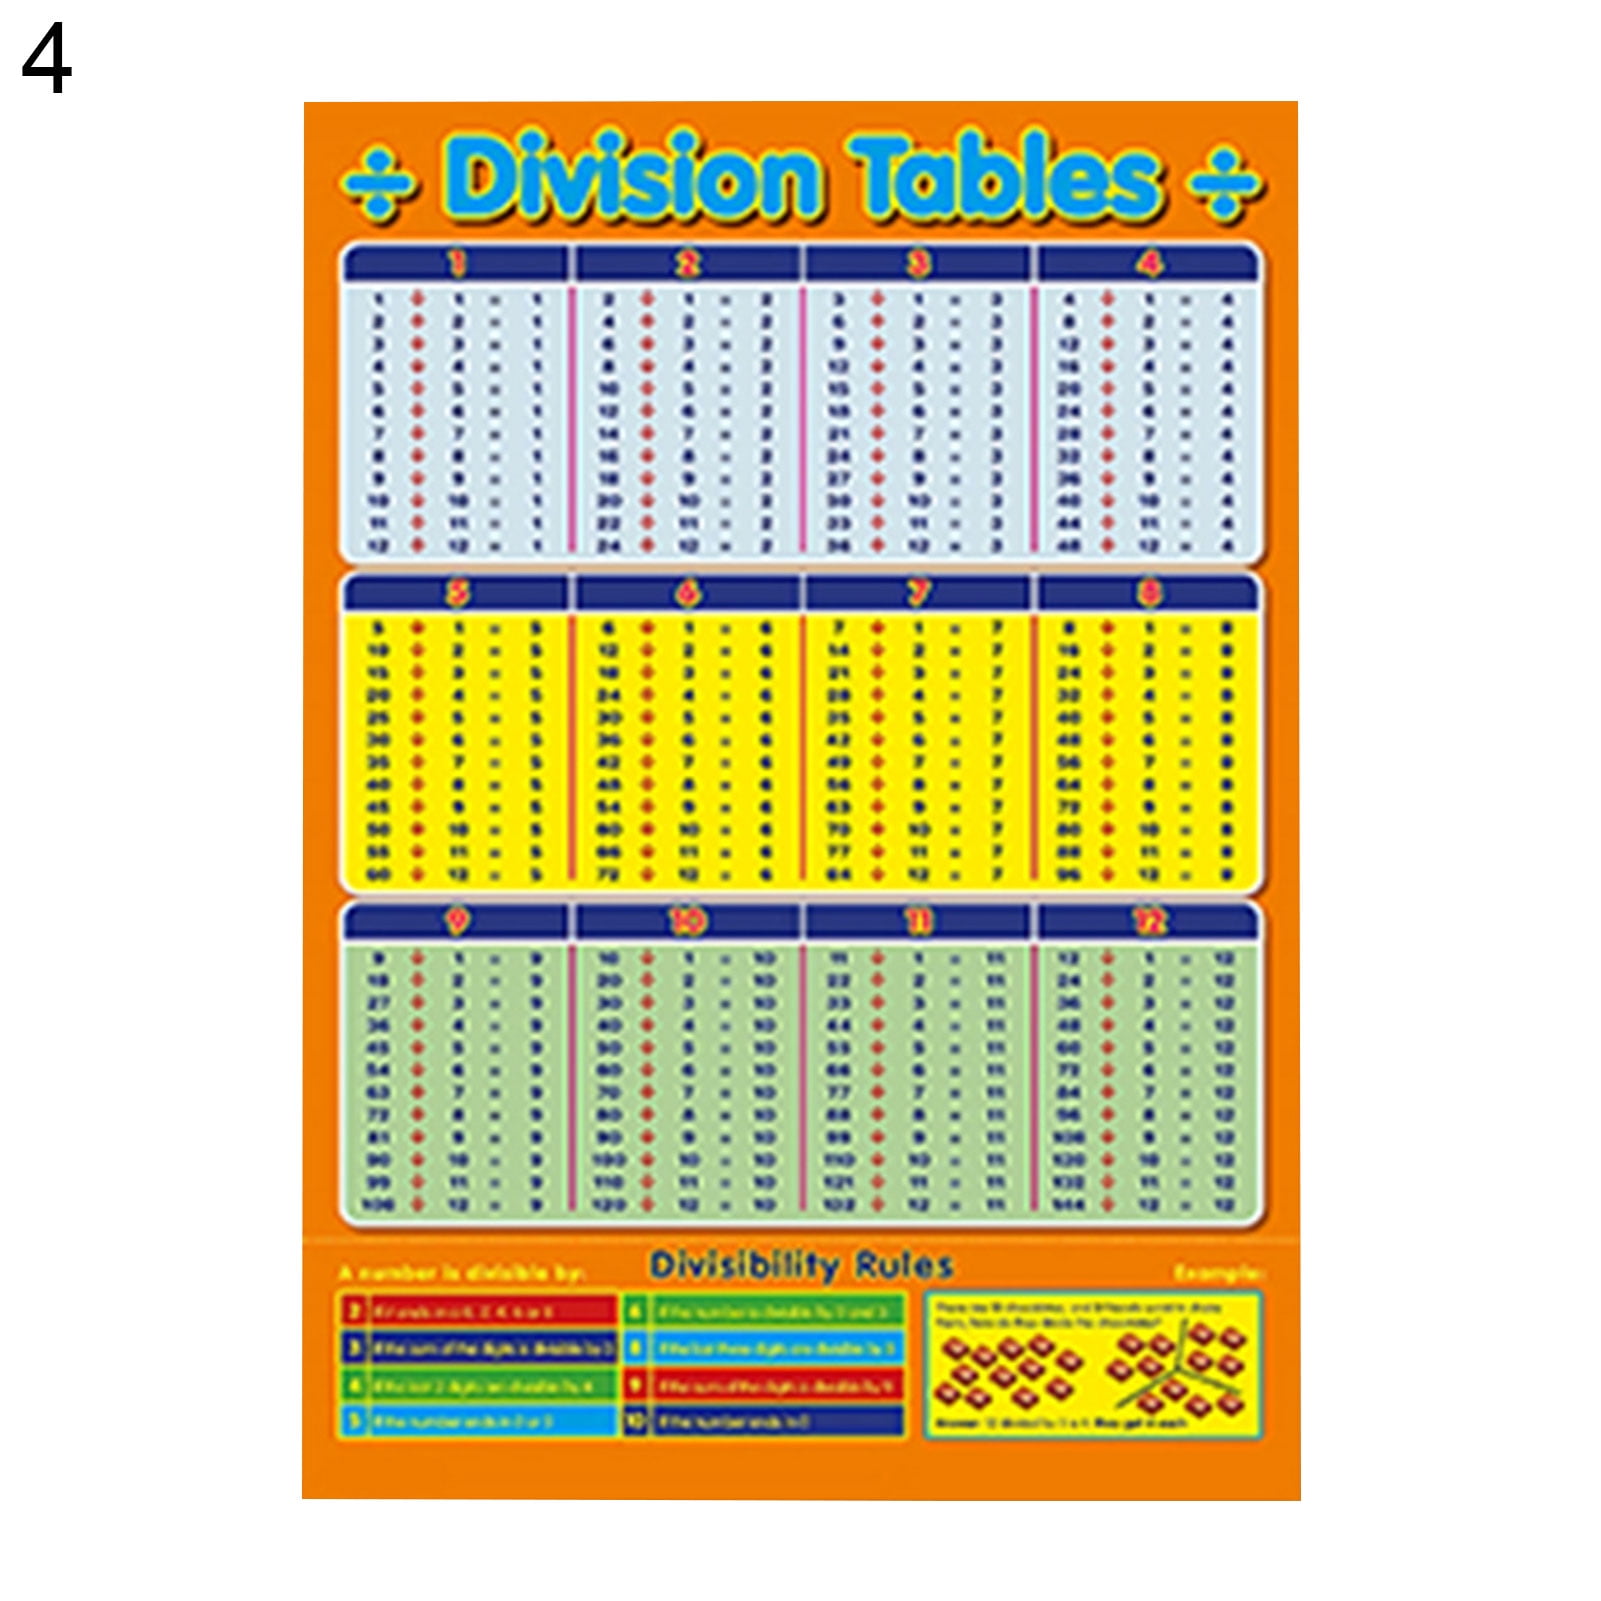 opolski-children-early-educational-maths-sums-1-to-12-times-tables-poster-wall-chart-walmart